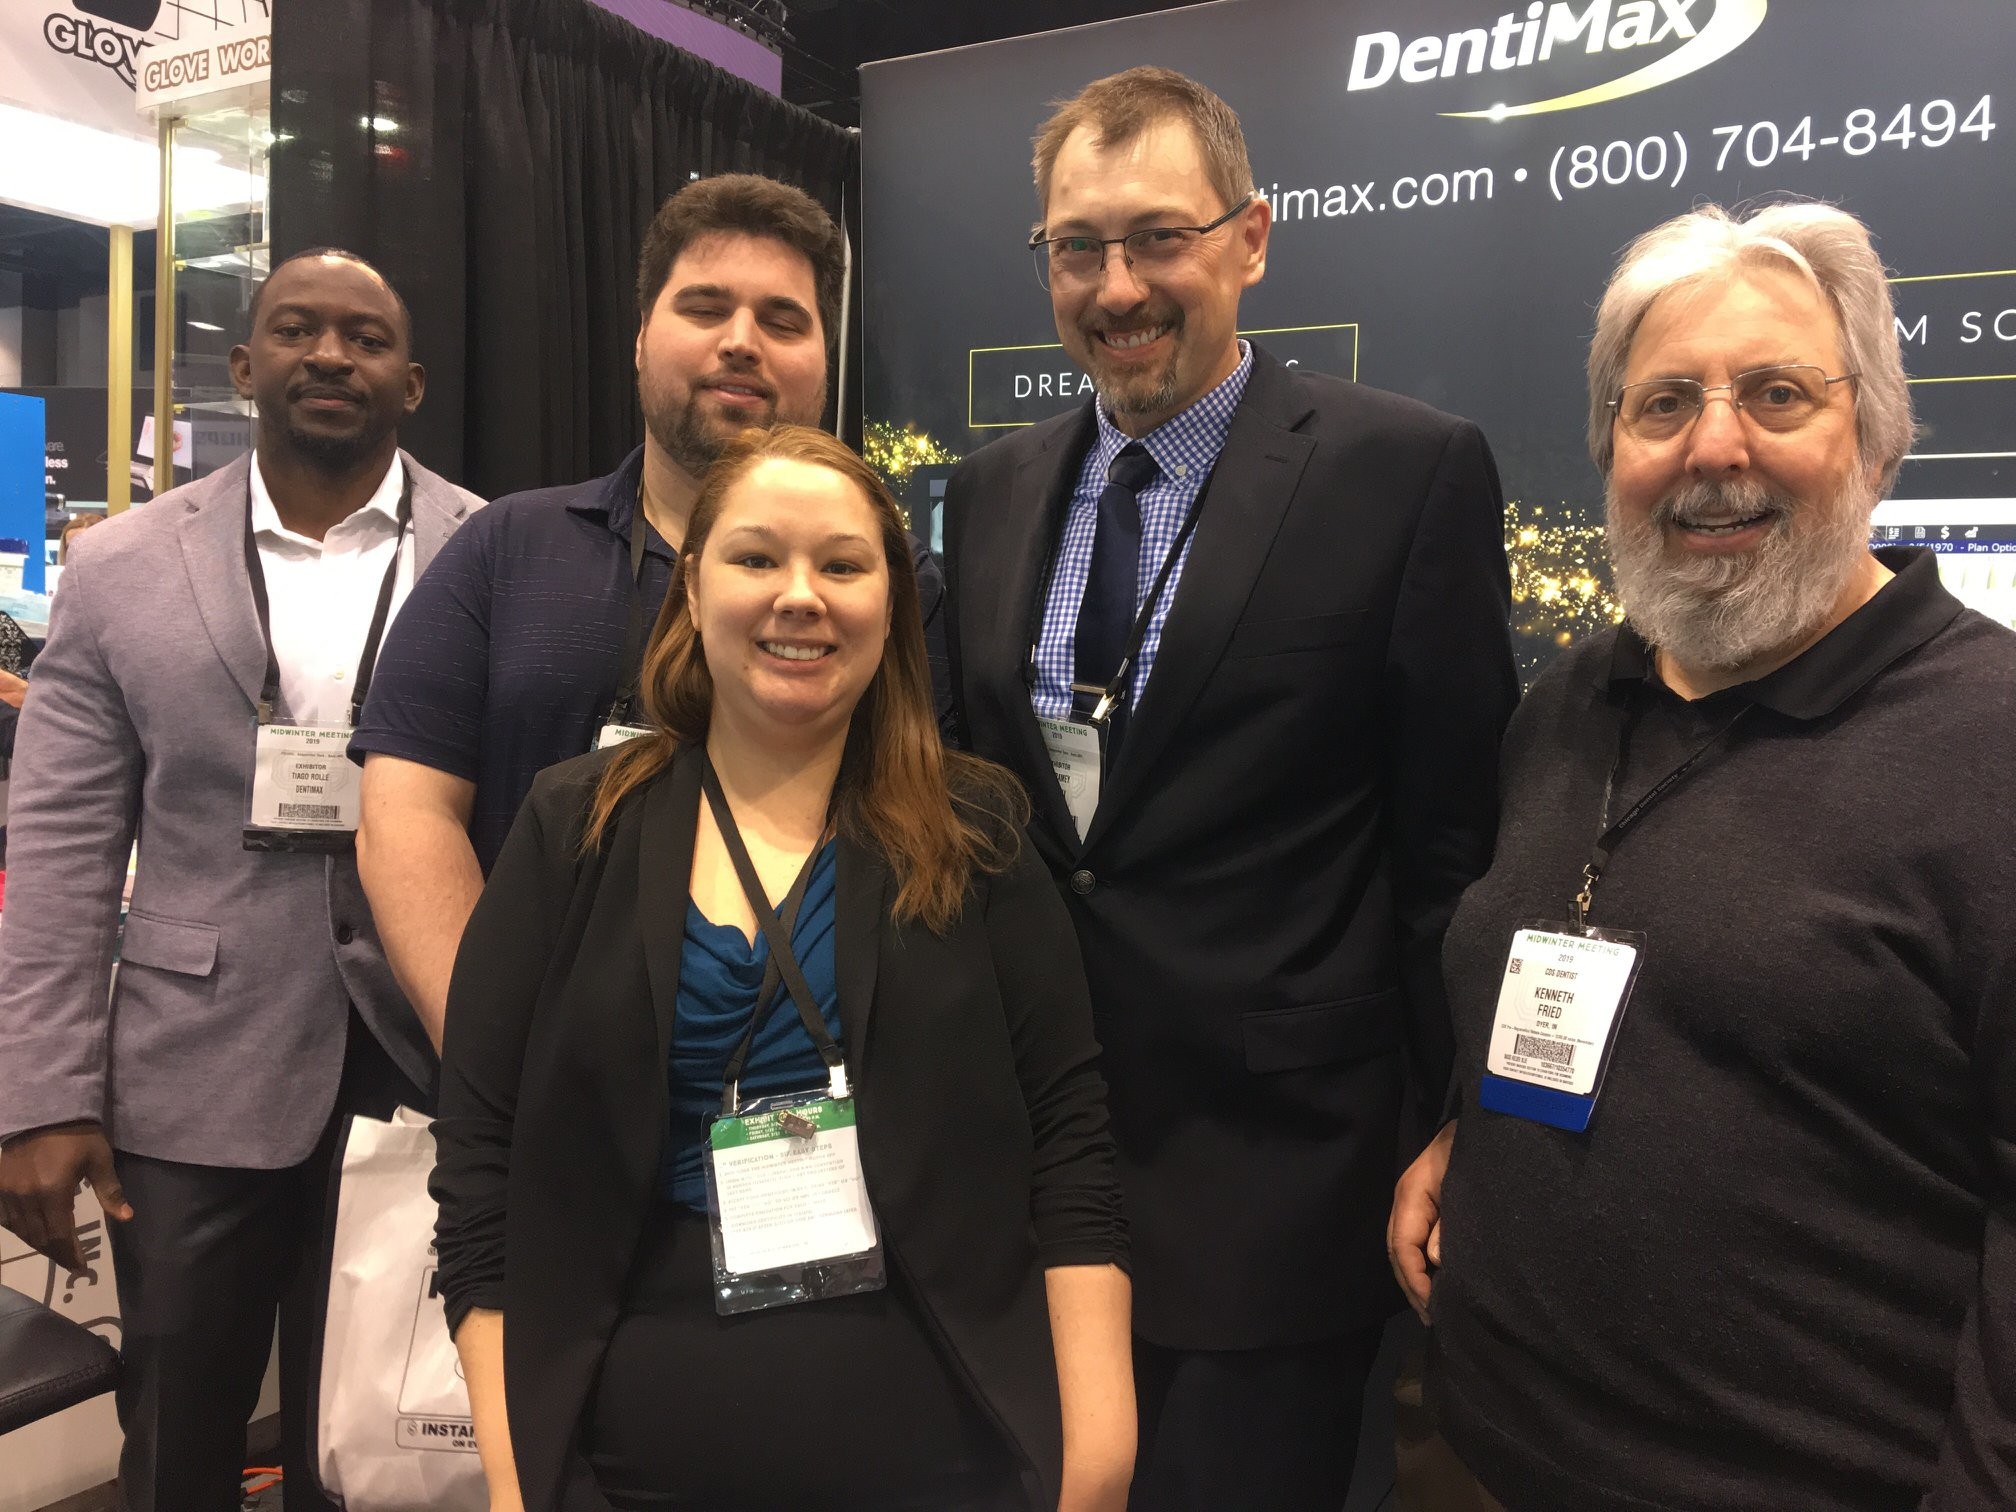 Meeting at the Chicago Midwinter 2019